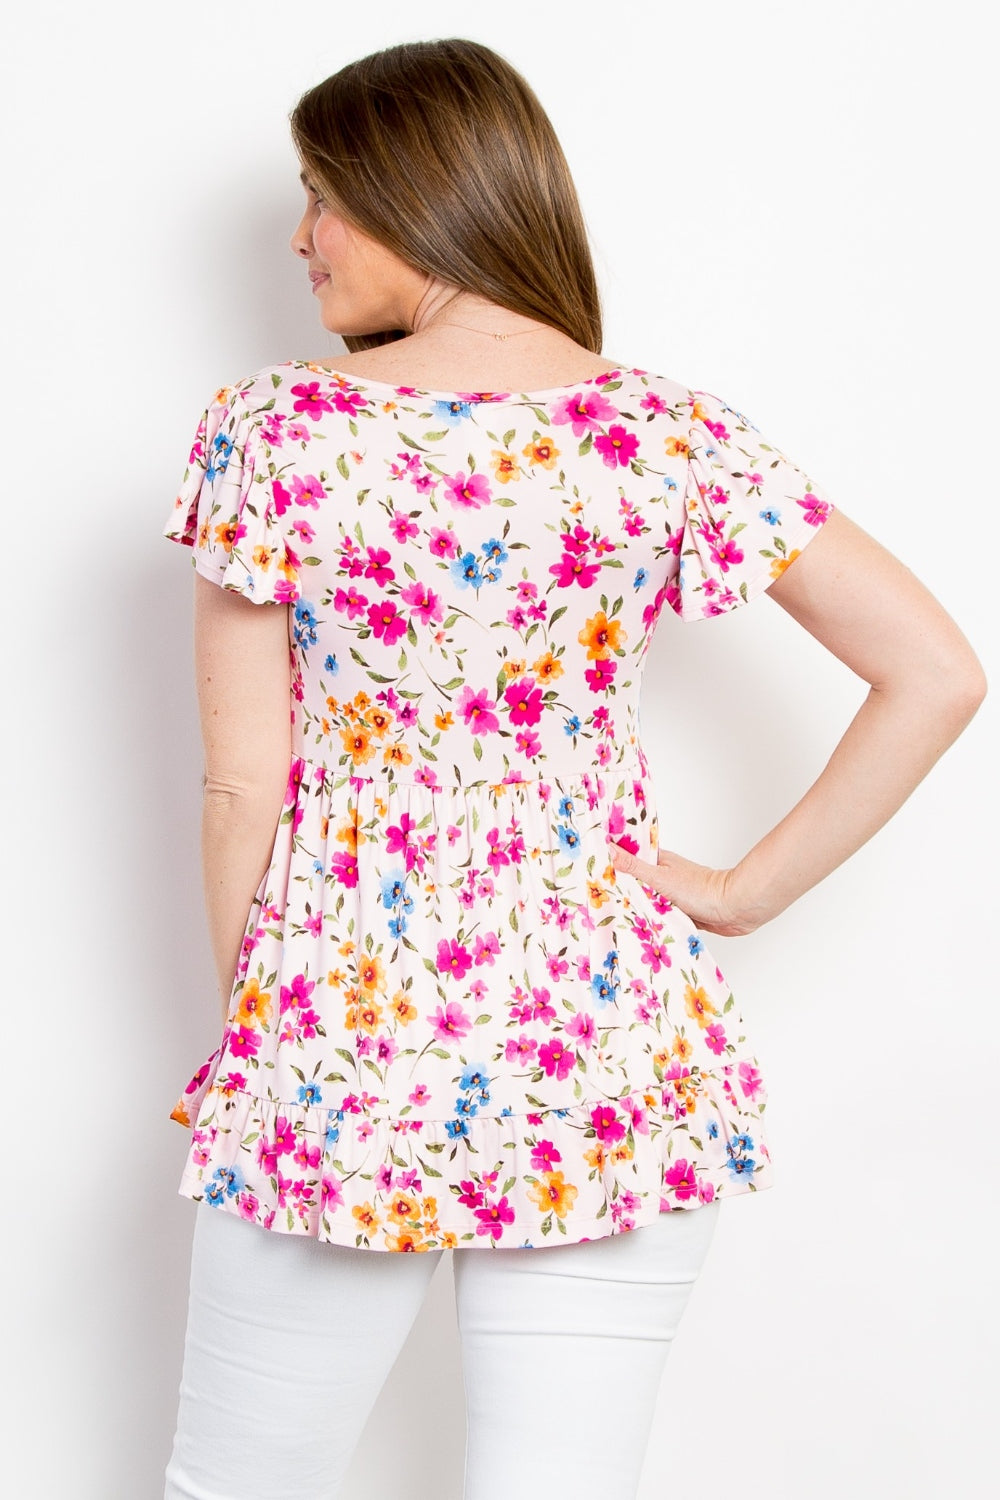 Hazel Blues® |  Be Stage Floral Short Sleeve Ruffled Top